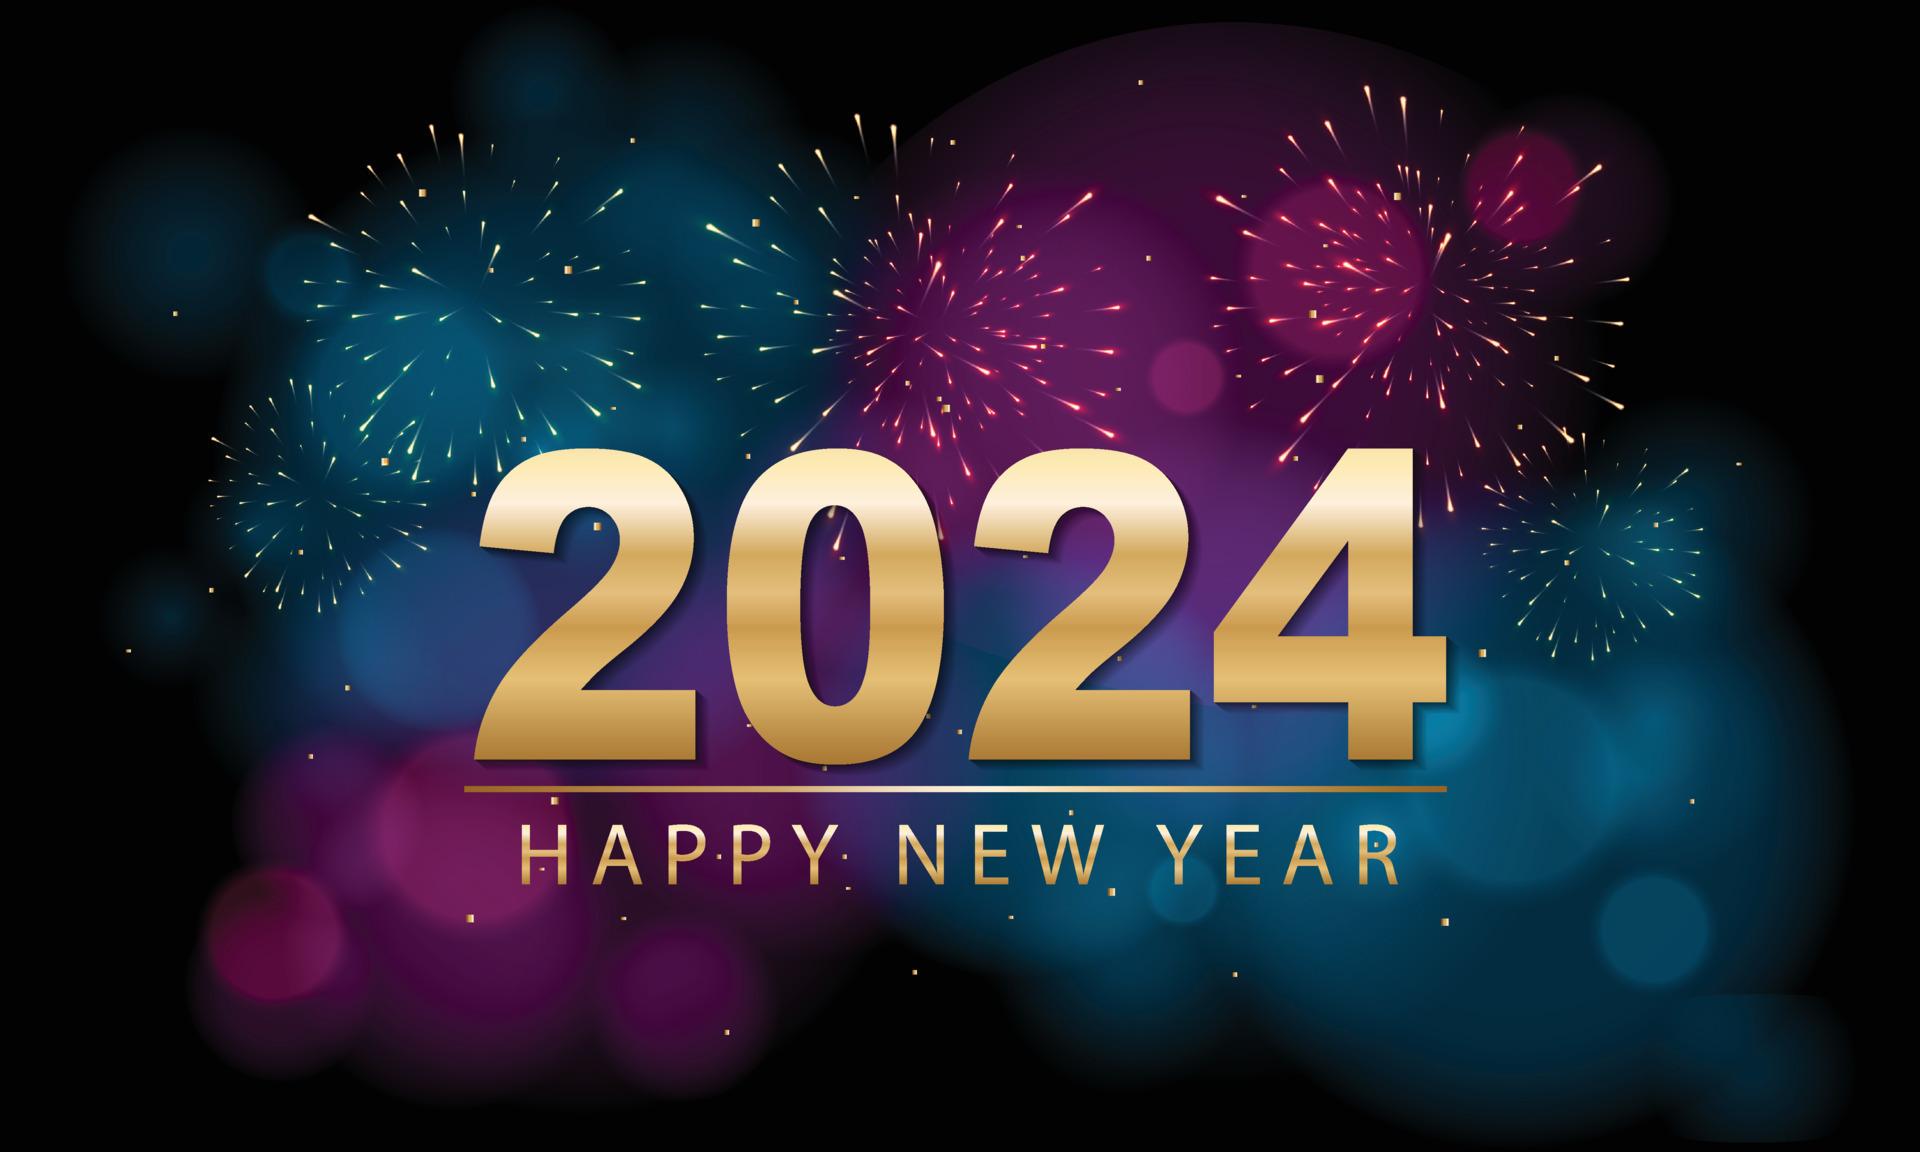 2024 happy new year background design greeting card banner poster illustration vector